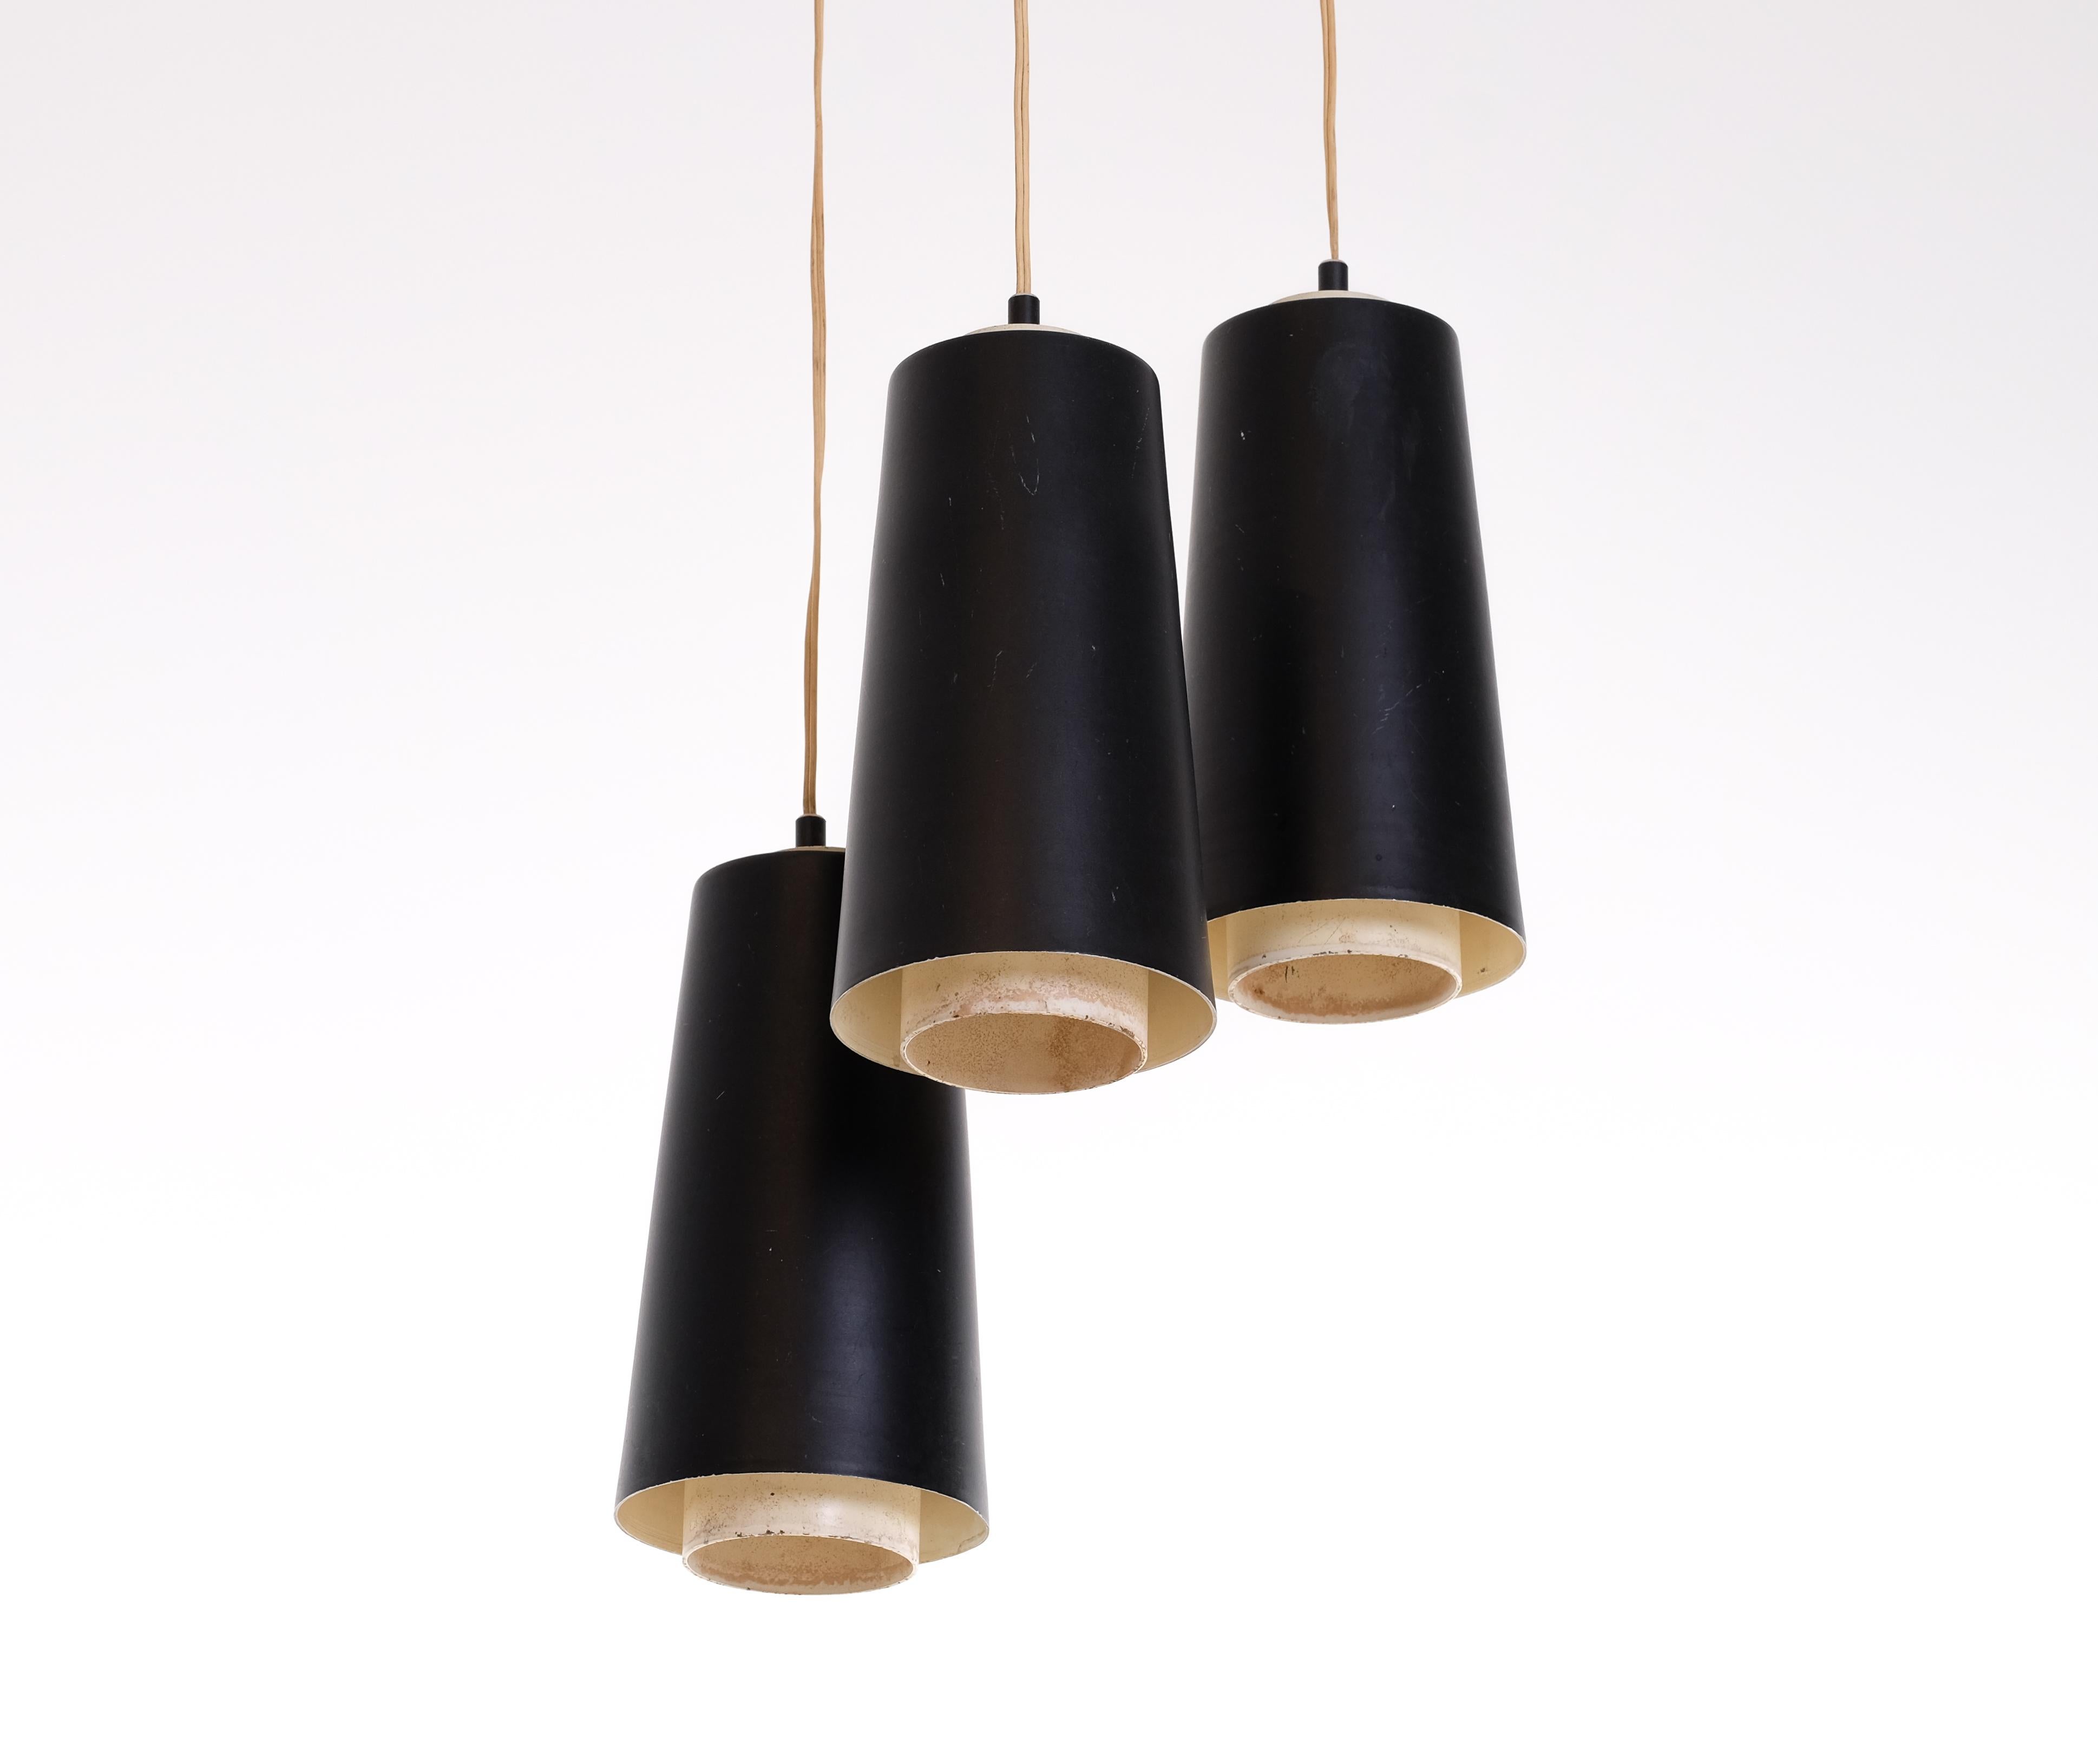 Three-armed pendant produced by Luco, Sweden, 1950s. Lacquered aluminum and steel with a brass ceiling mount.